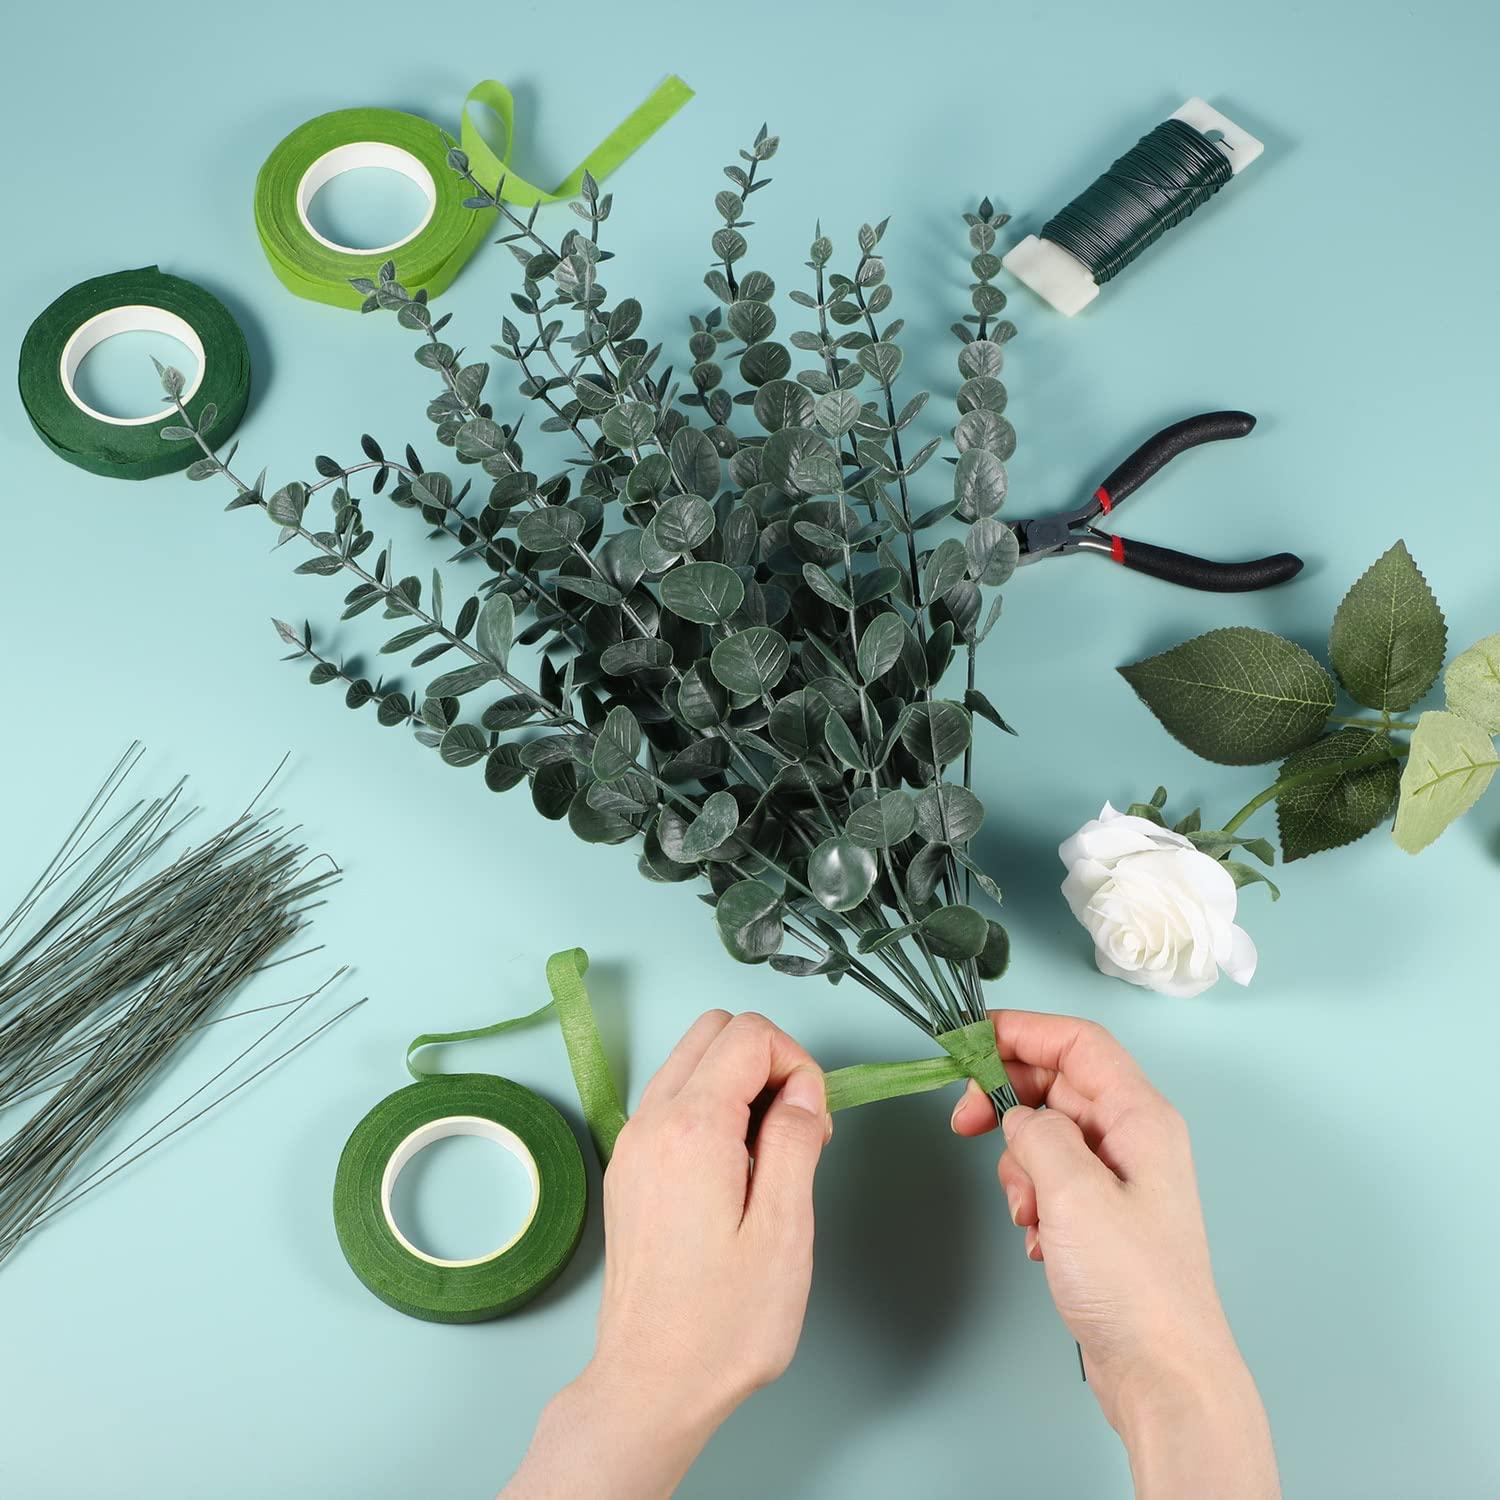 SONGZIMING Floral Arrangement Kit with Green Floral Tape, 22 Gauge